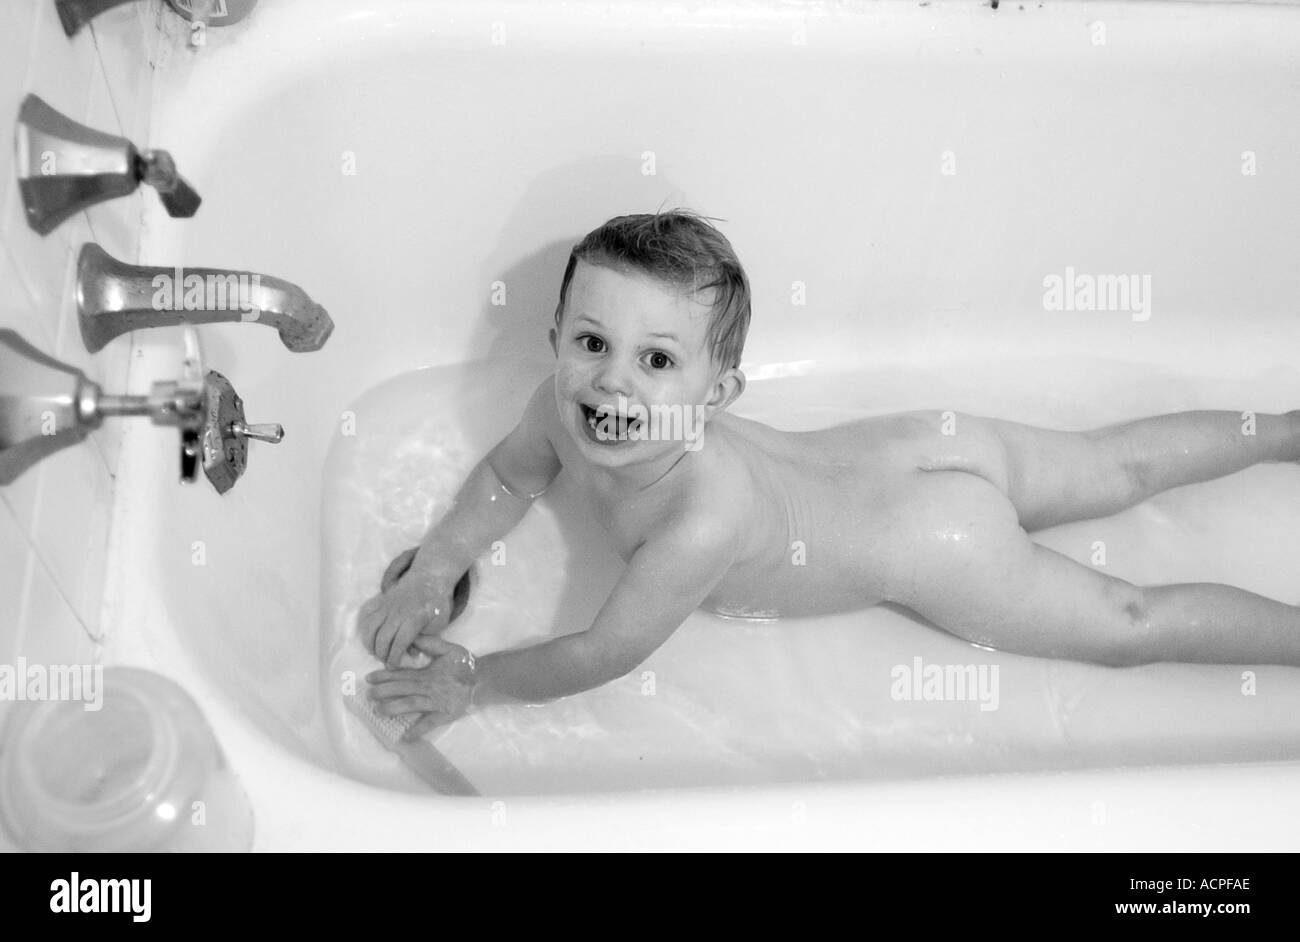 Small baby boy in tub playing in tubby Stock Photo